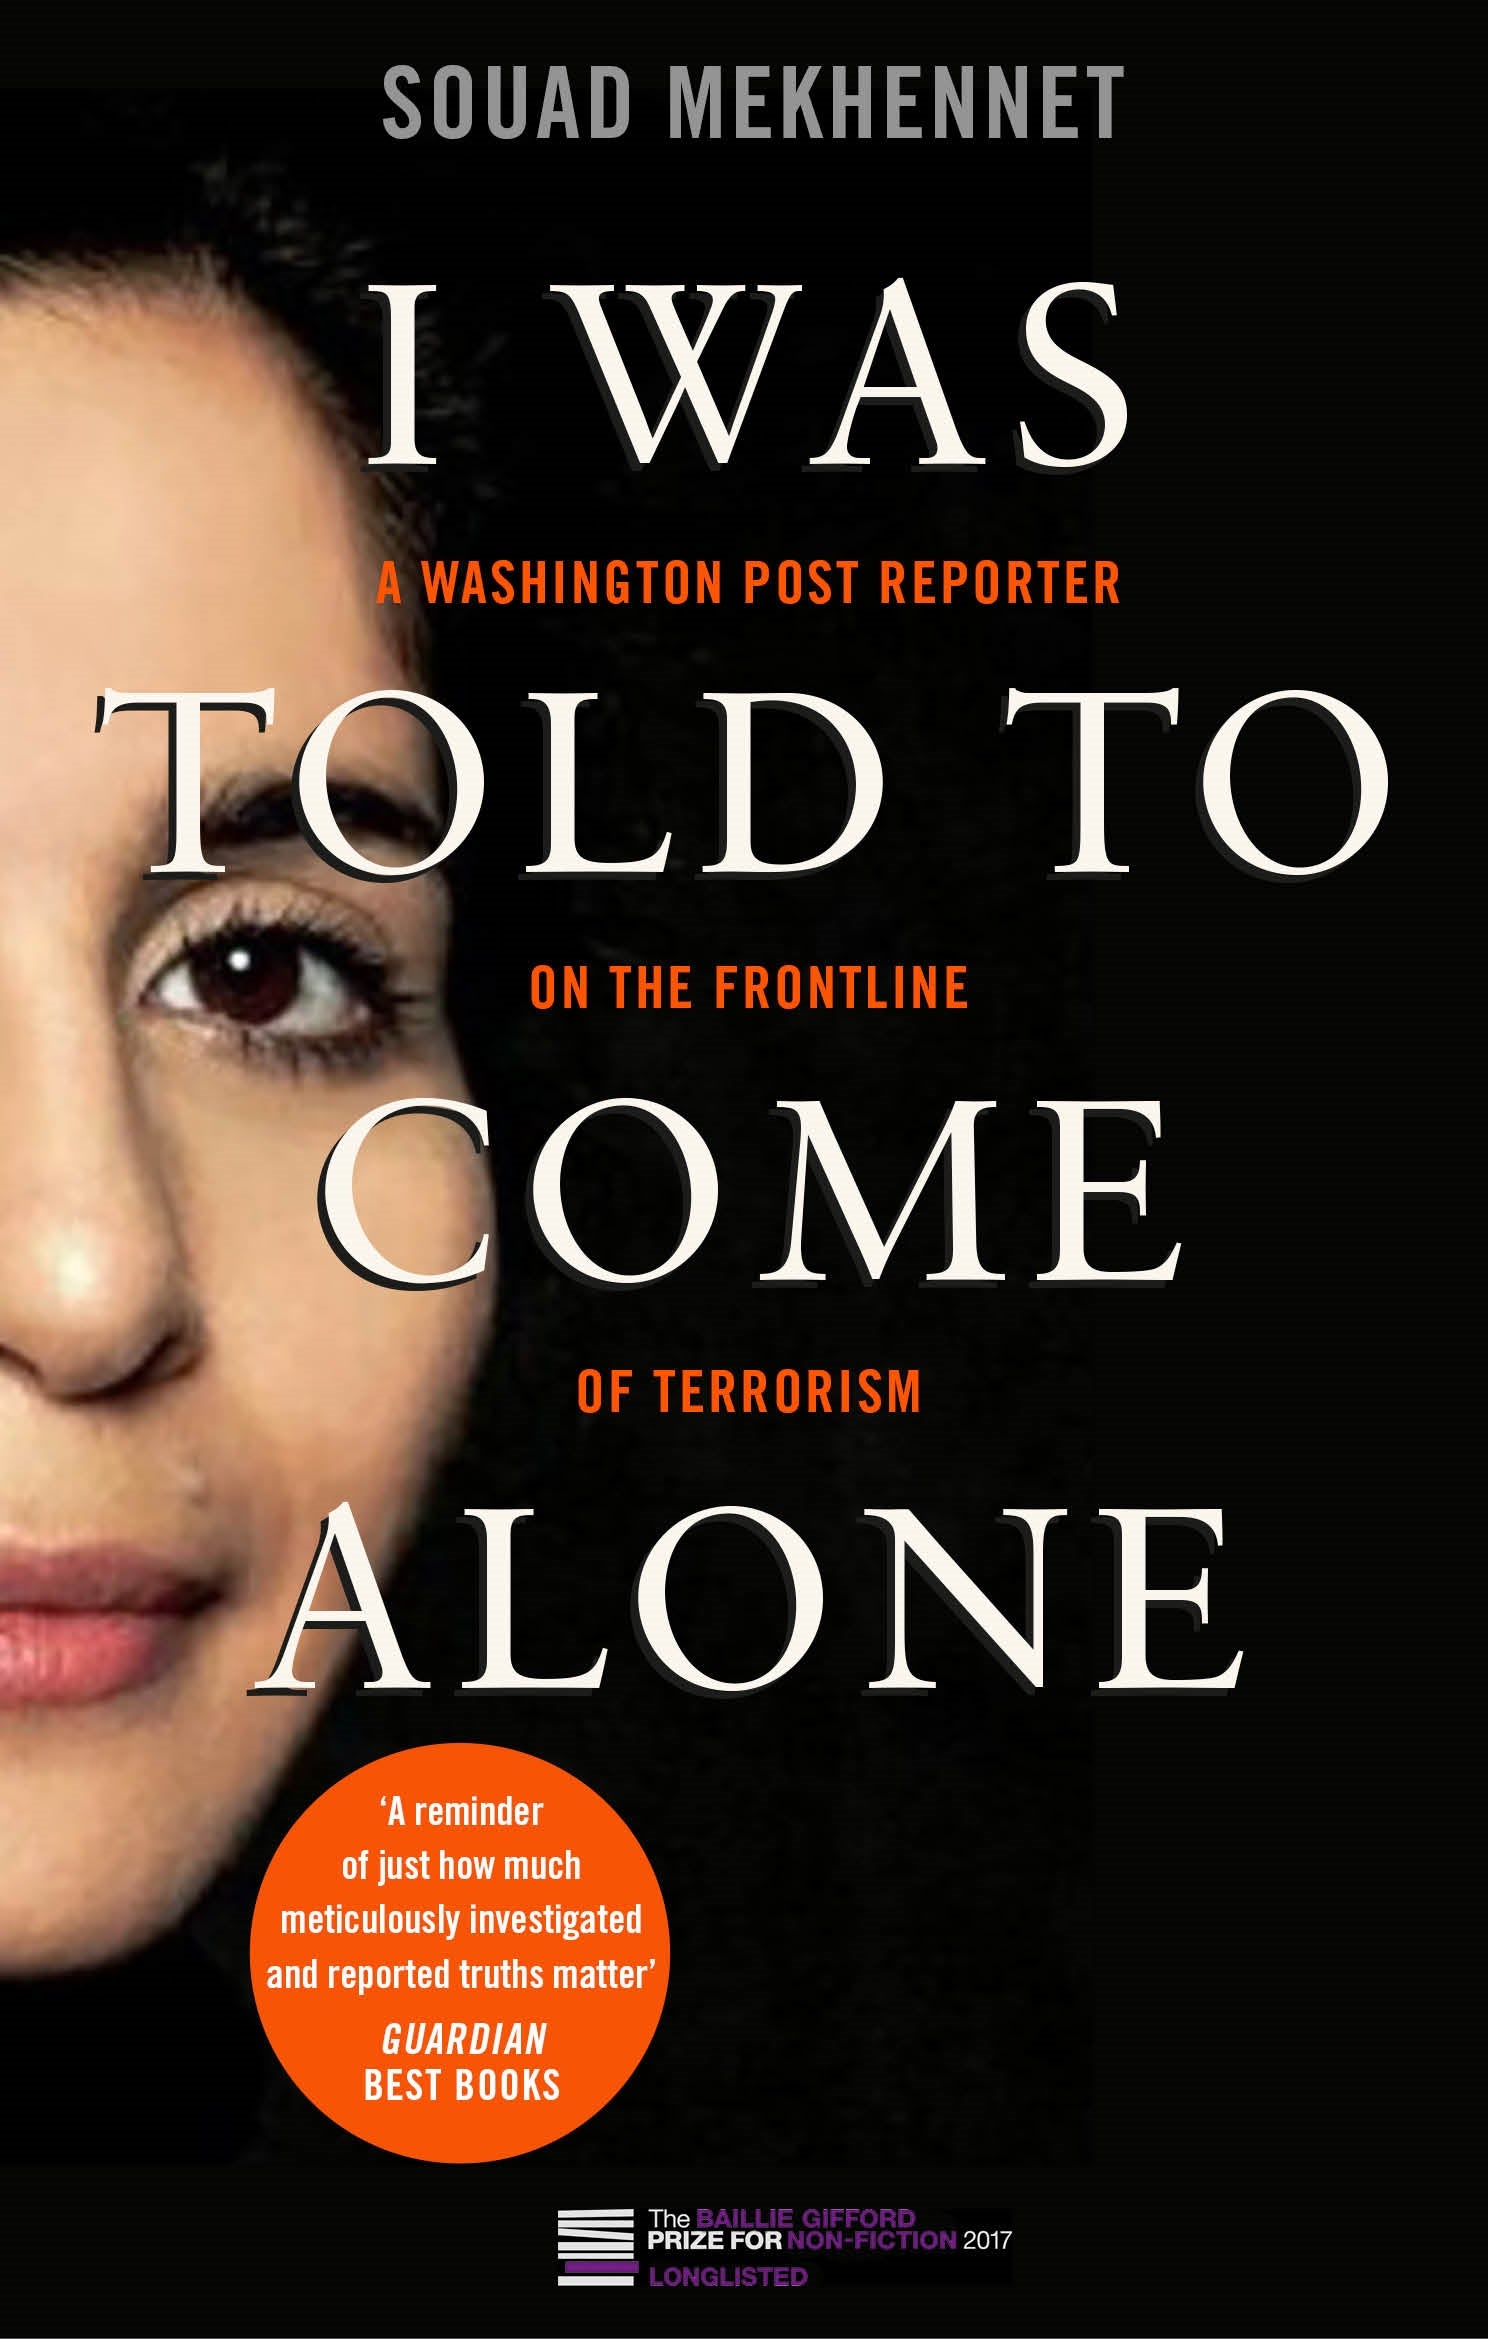 I Was Told To Come Alone by Souad Mekhennet